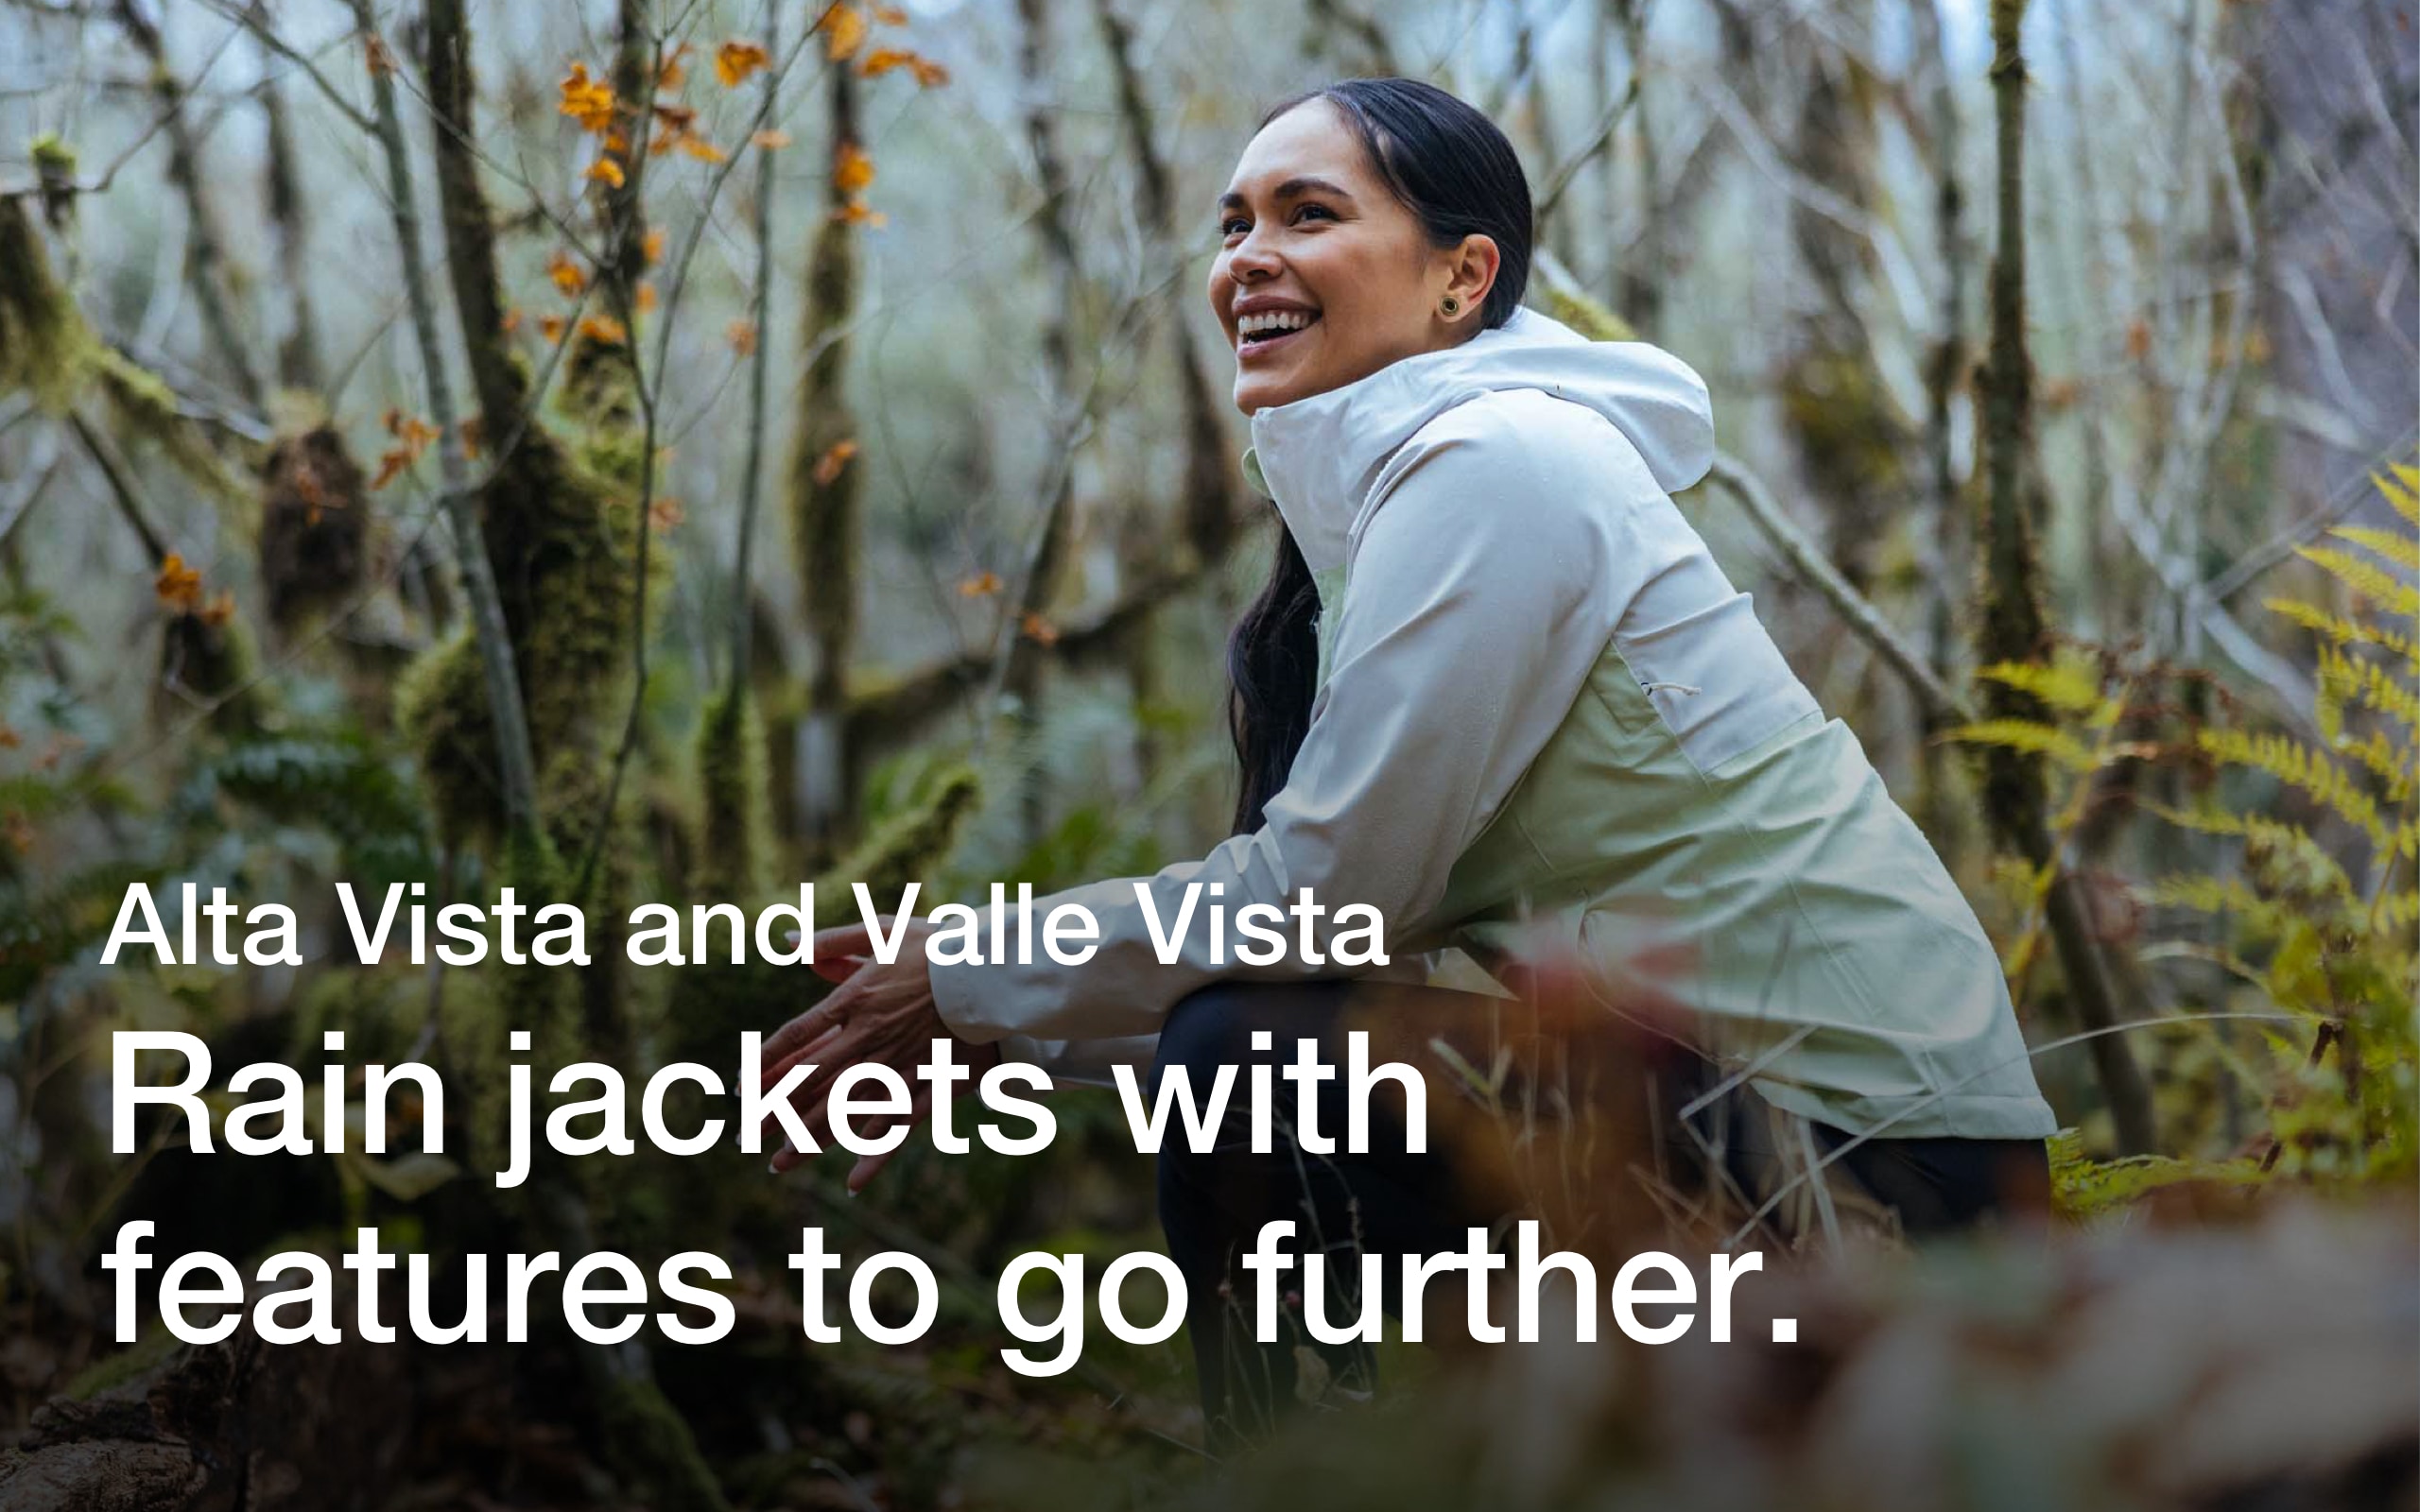 Experience new rain jackets from The North Face.